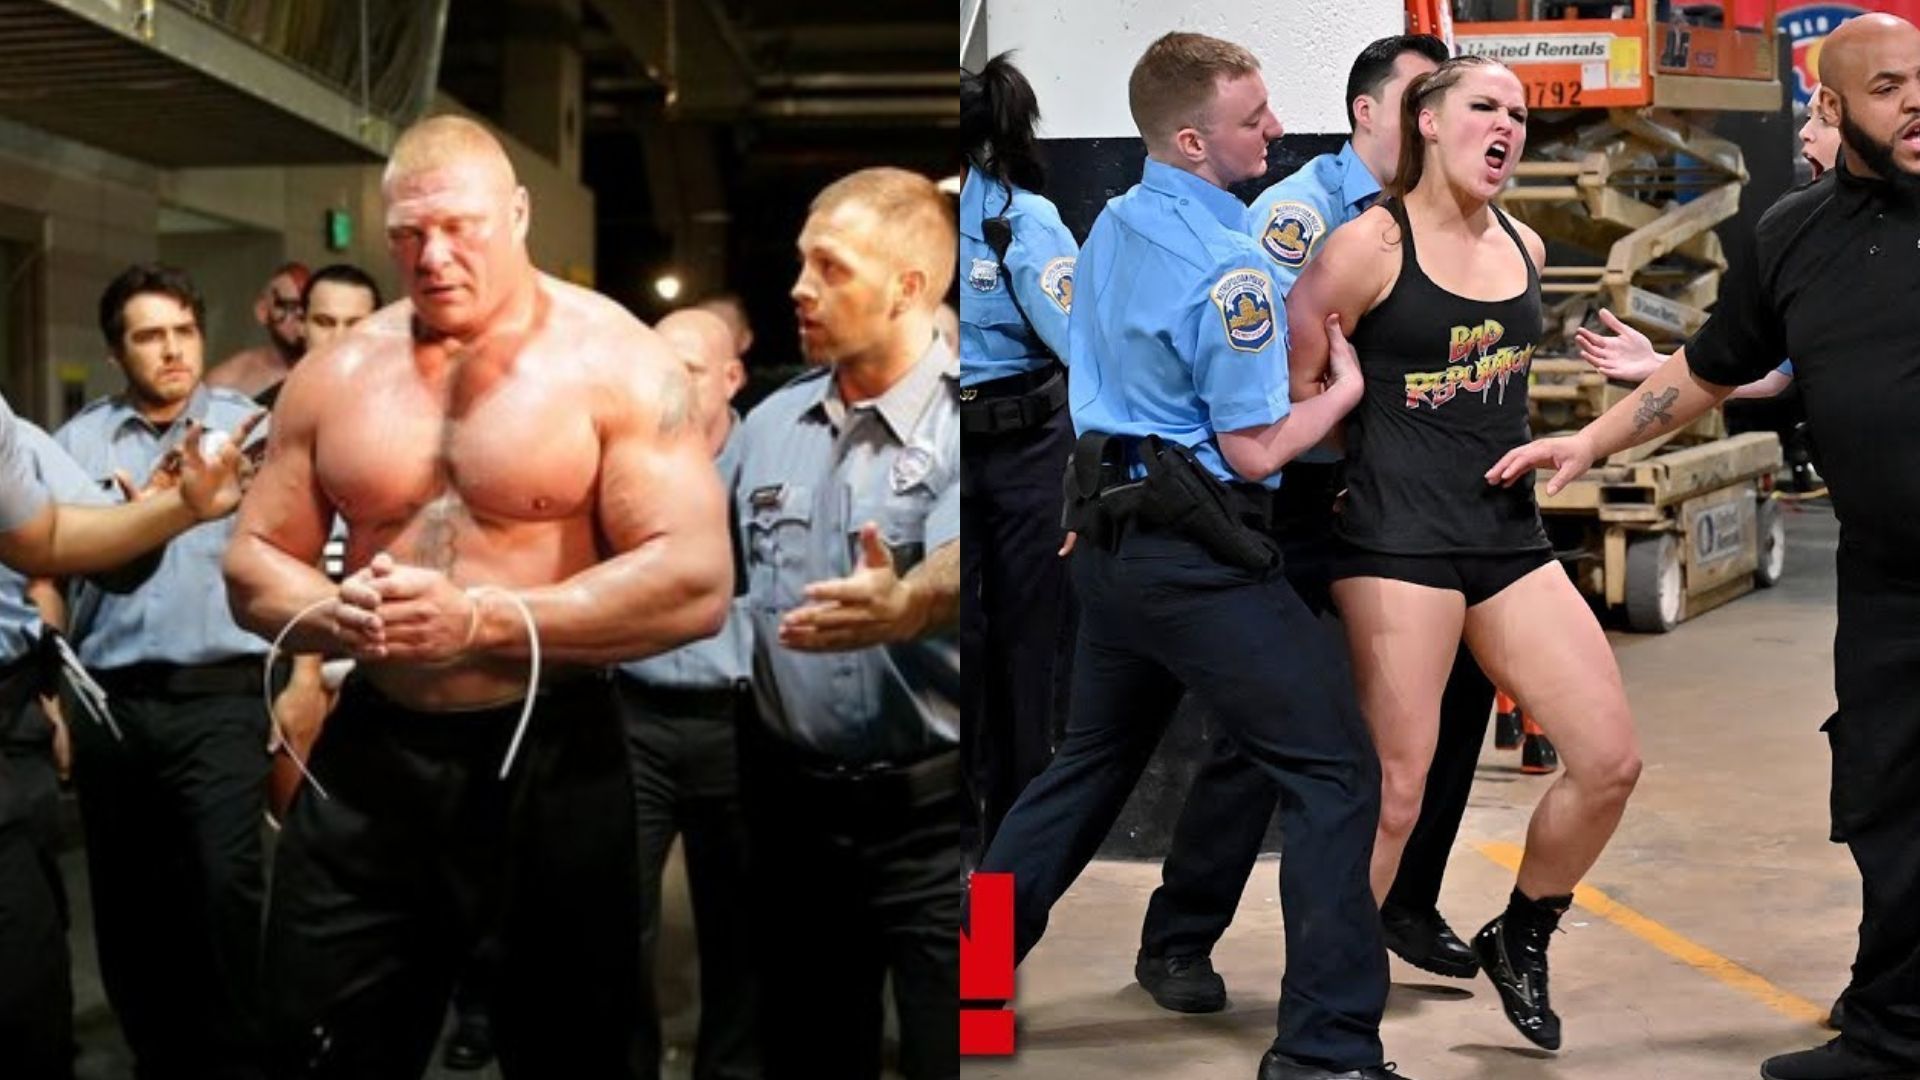 Brock Lesnar (L) and Ronda Rousey (R) being arrested.